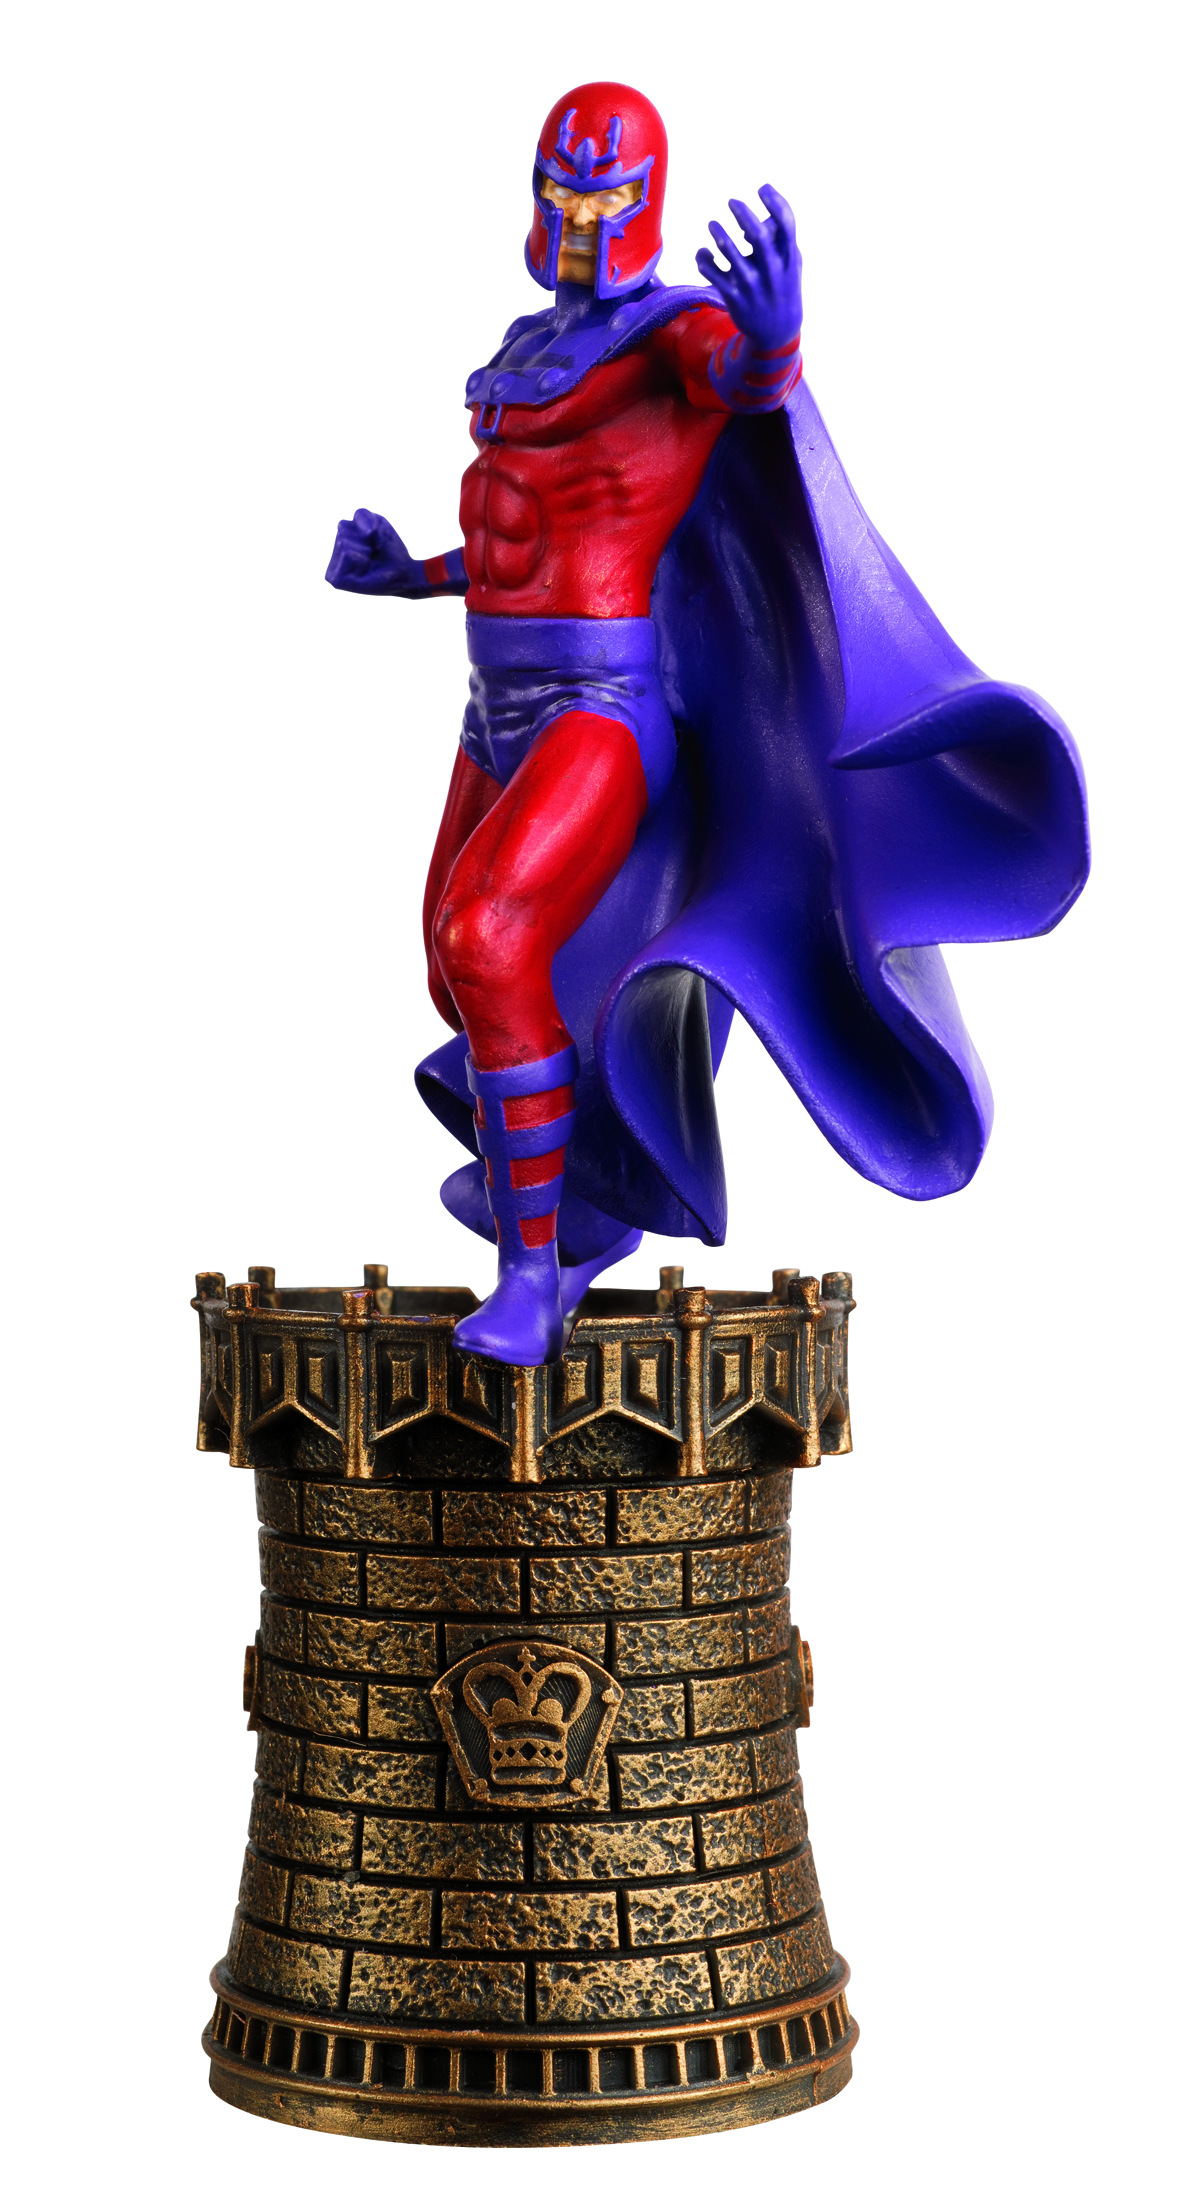 MAY151830 - MARVEL CHESS FIG COLL MAG #39 MAGNETO BLACK KING - Previews  World